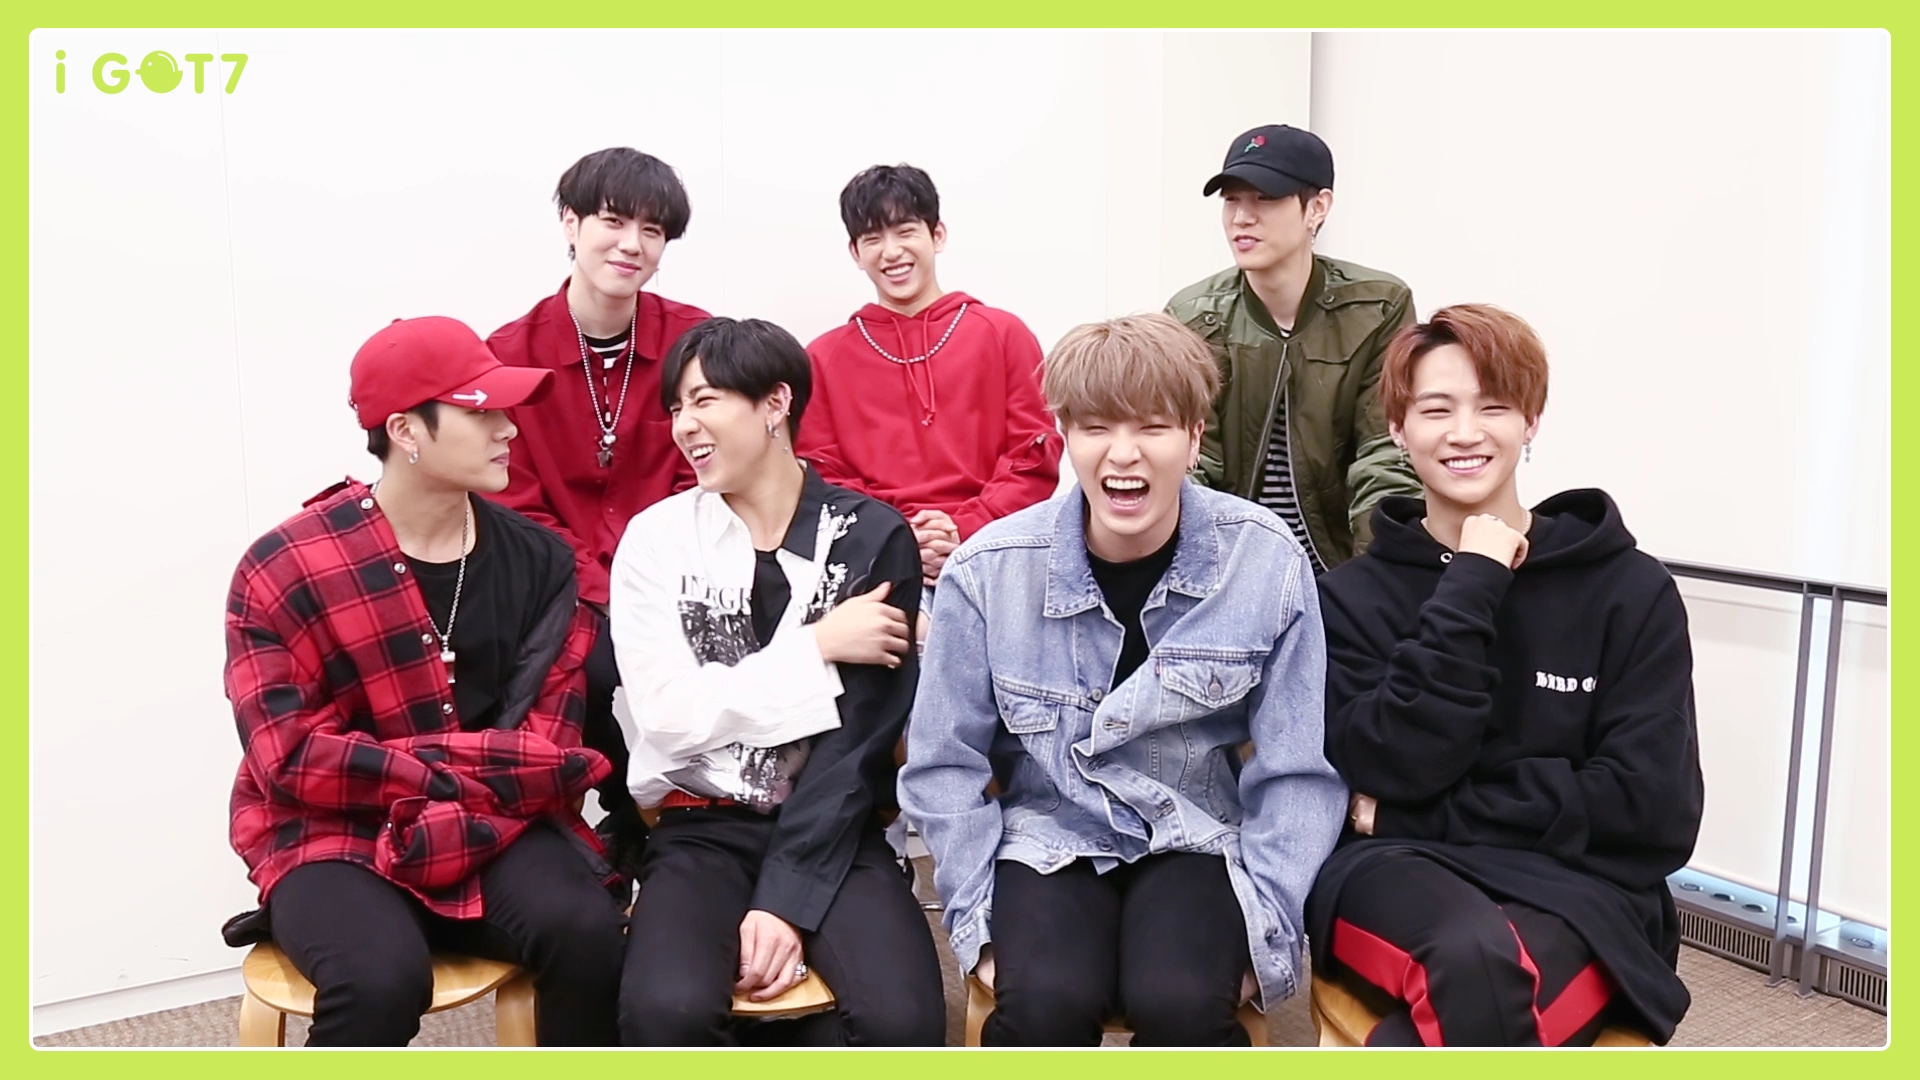 Invitaion Letter for I GOT7 4th Generation from GOT7